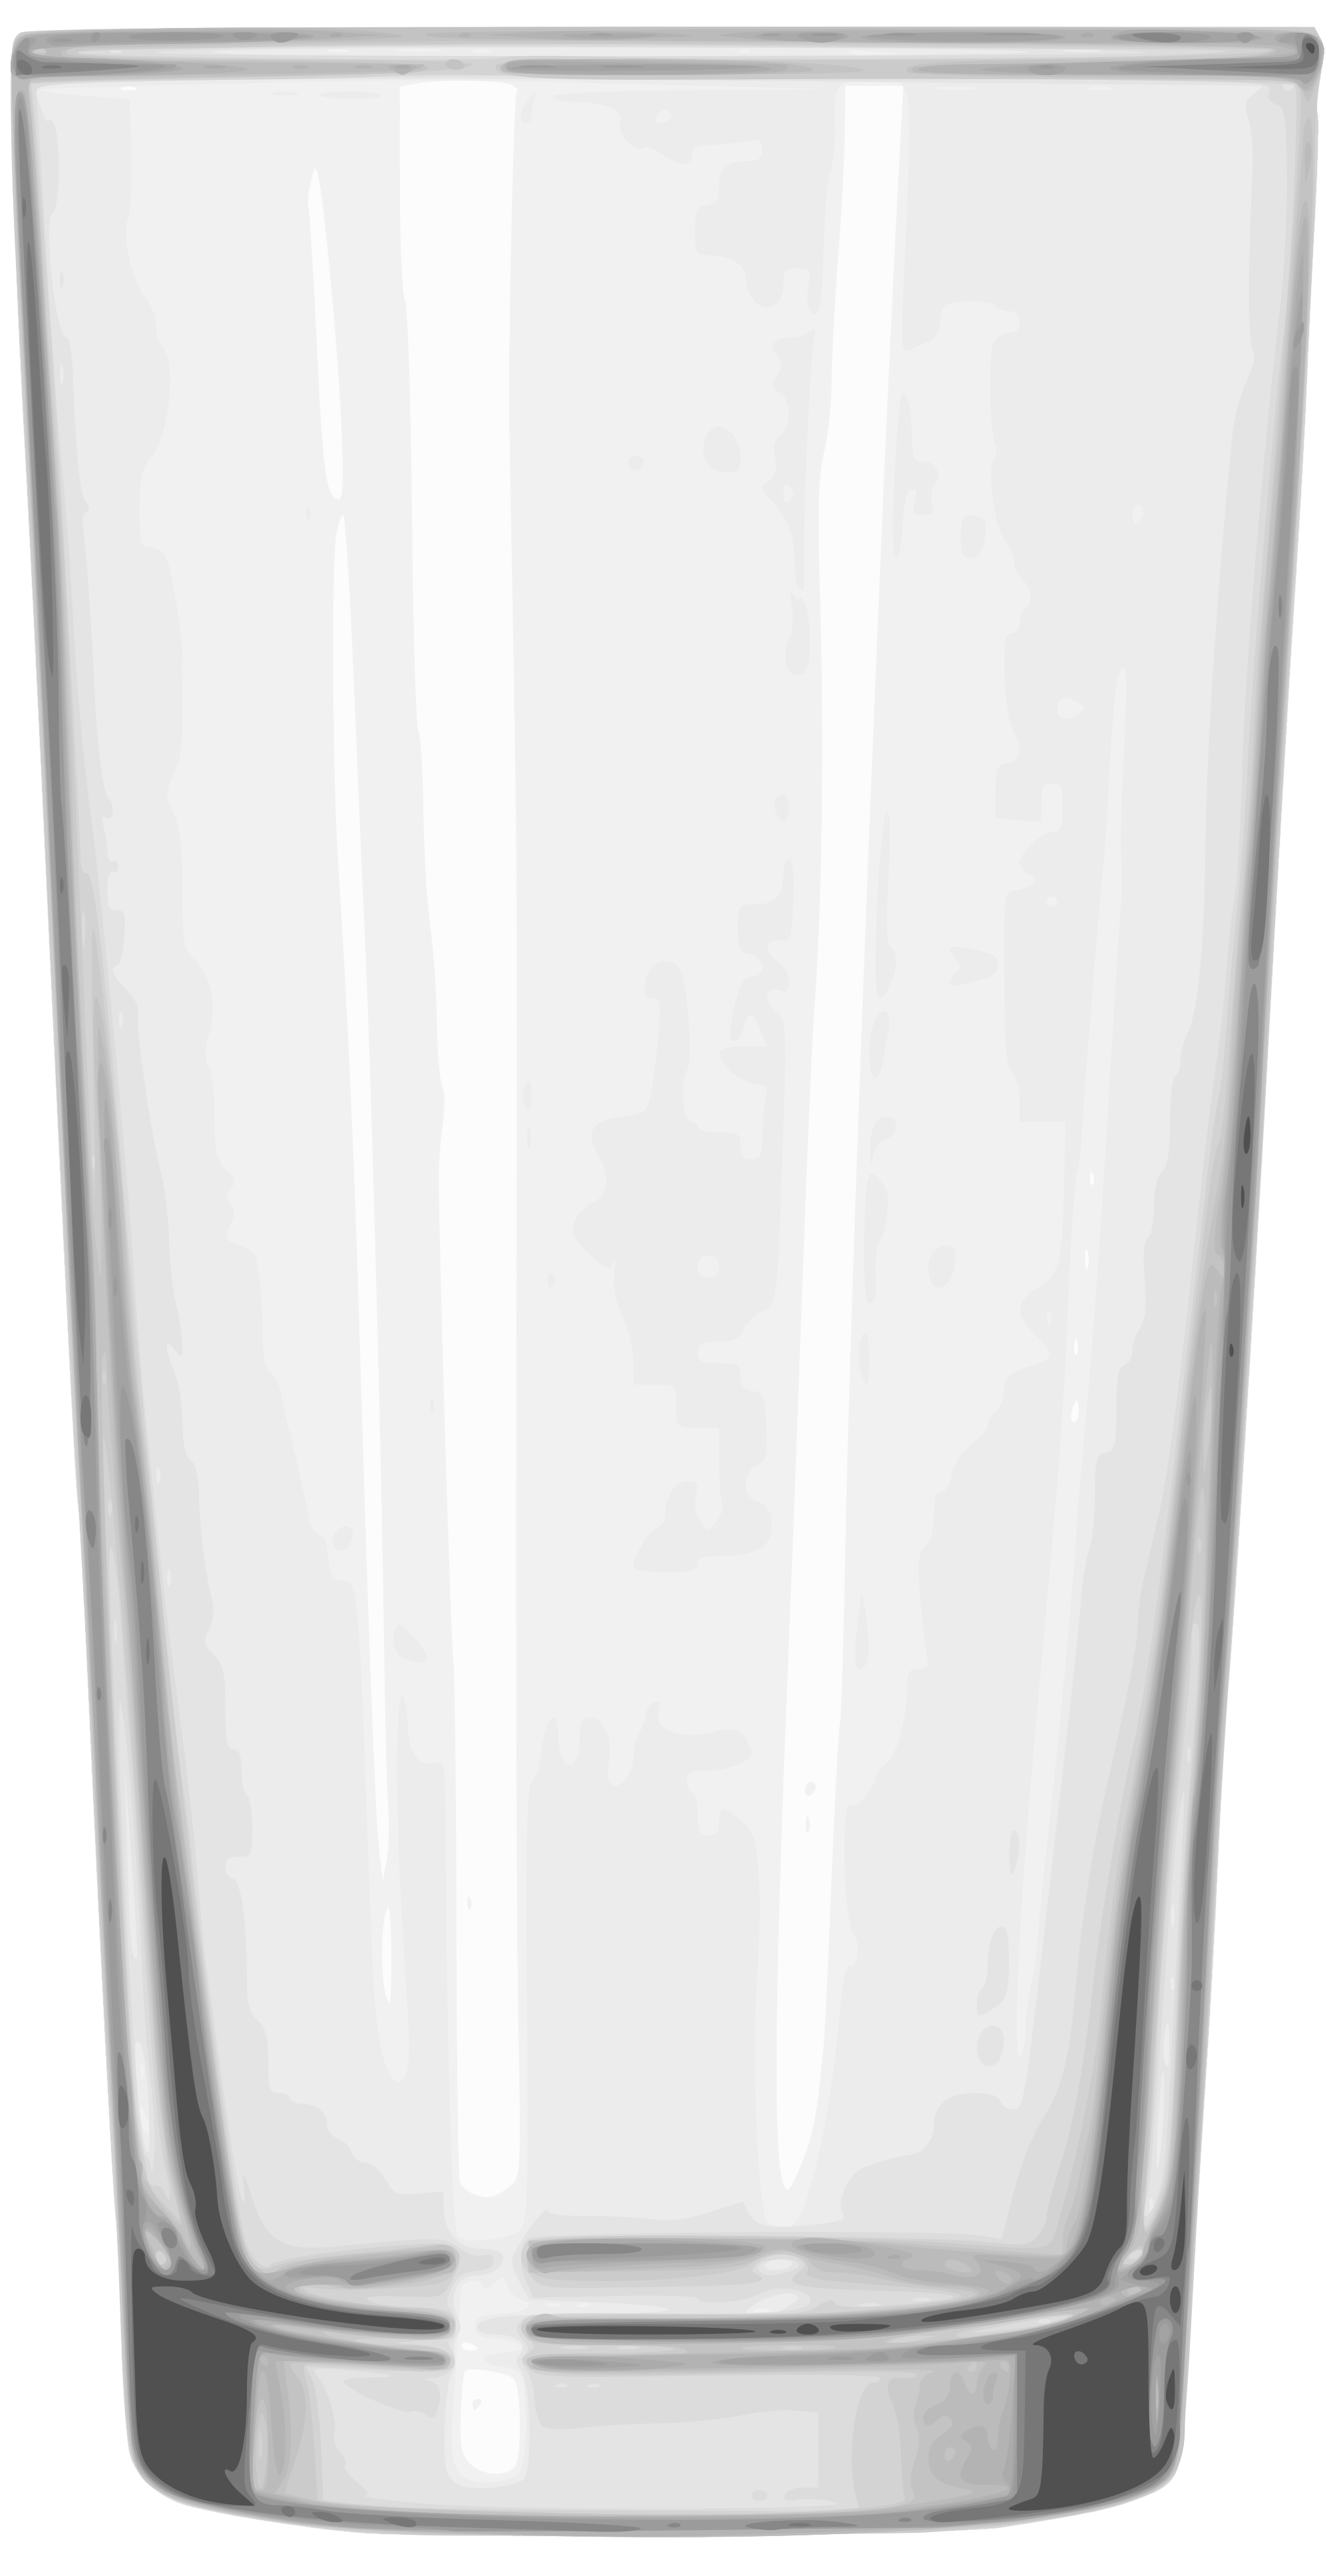 Drinking Glass Image PNG Image